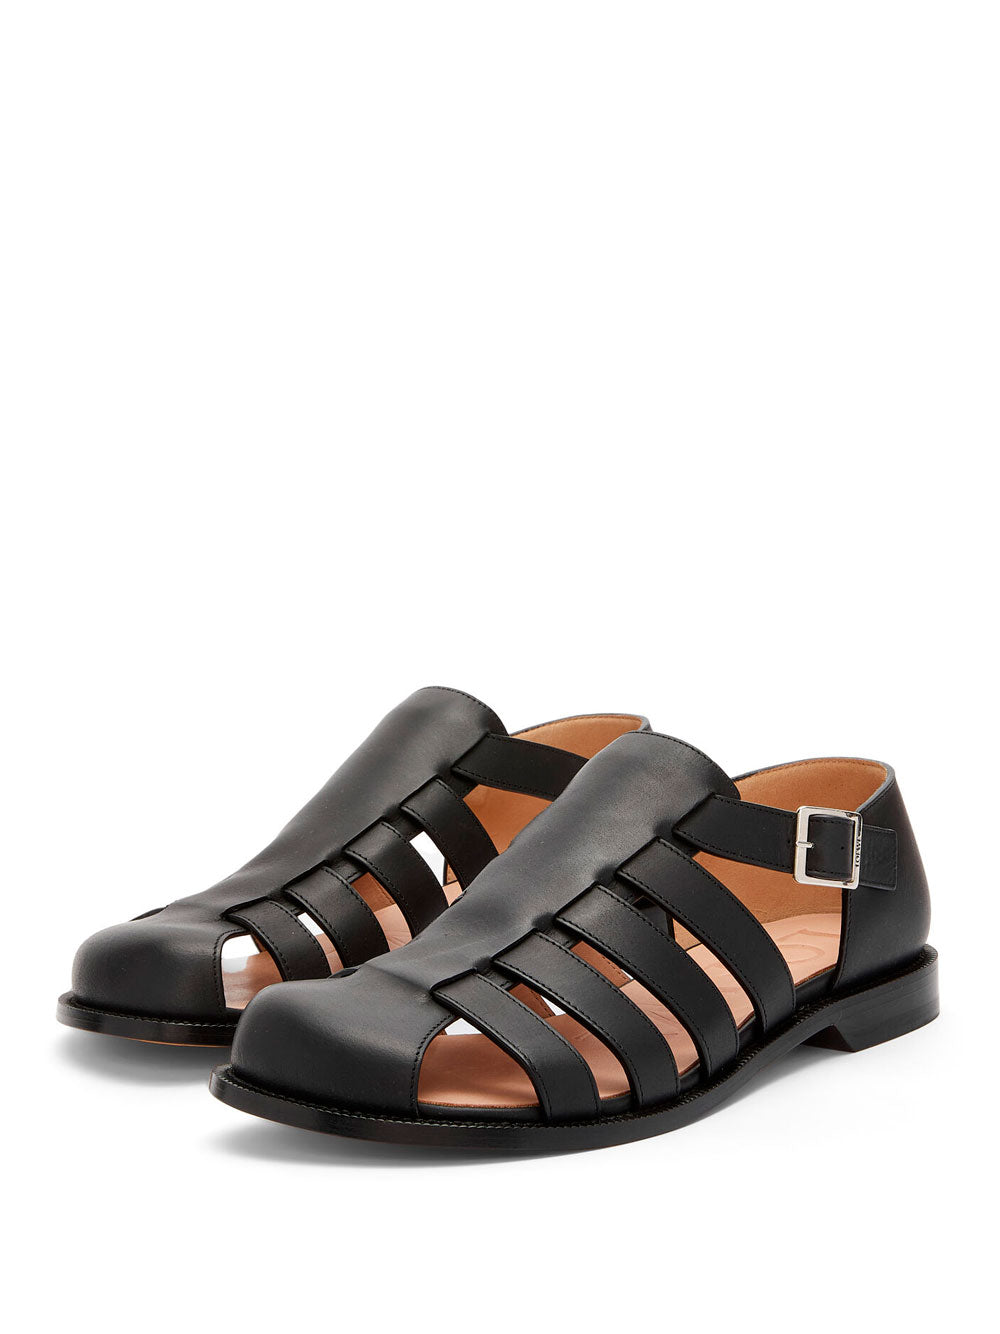 Campo sandals